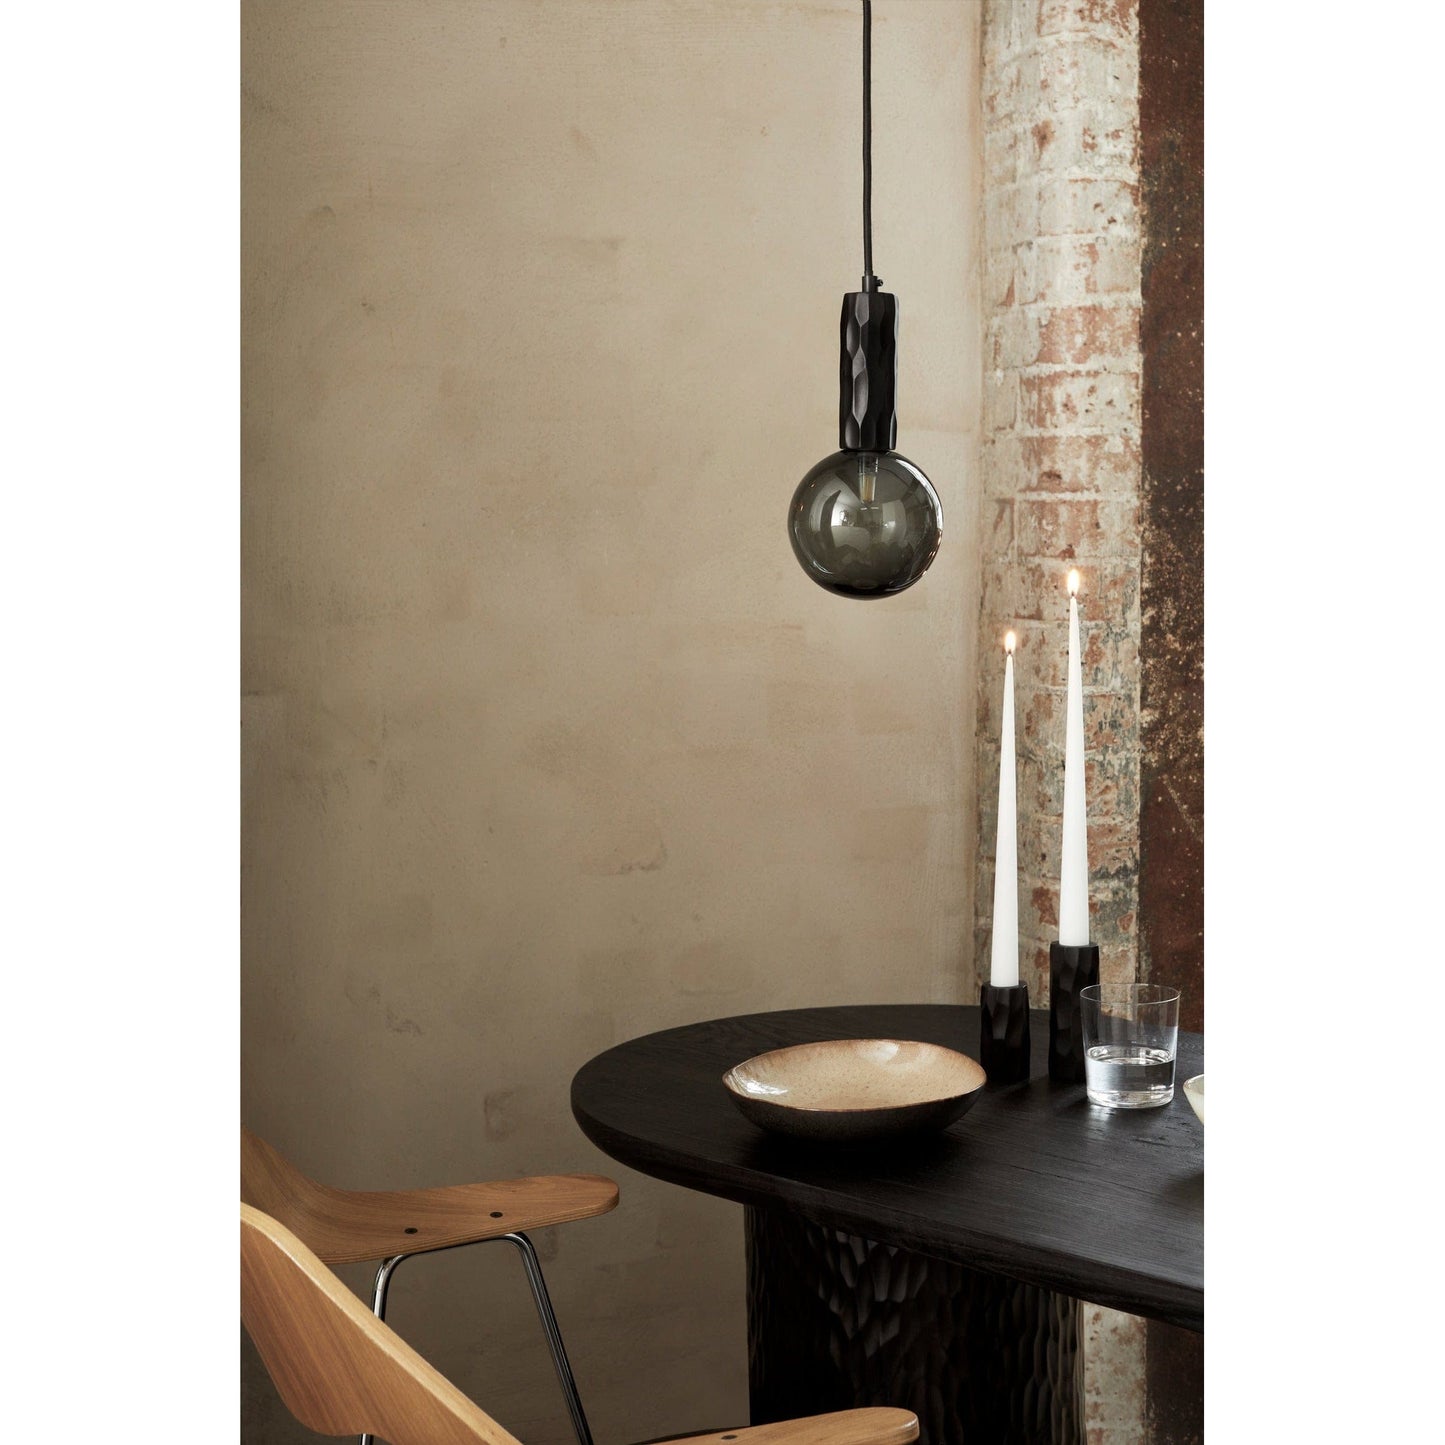 Alex Price Pendant lights Smoked Glass KYOTO Pendant Light Black with White, Smoked or Clear Glass